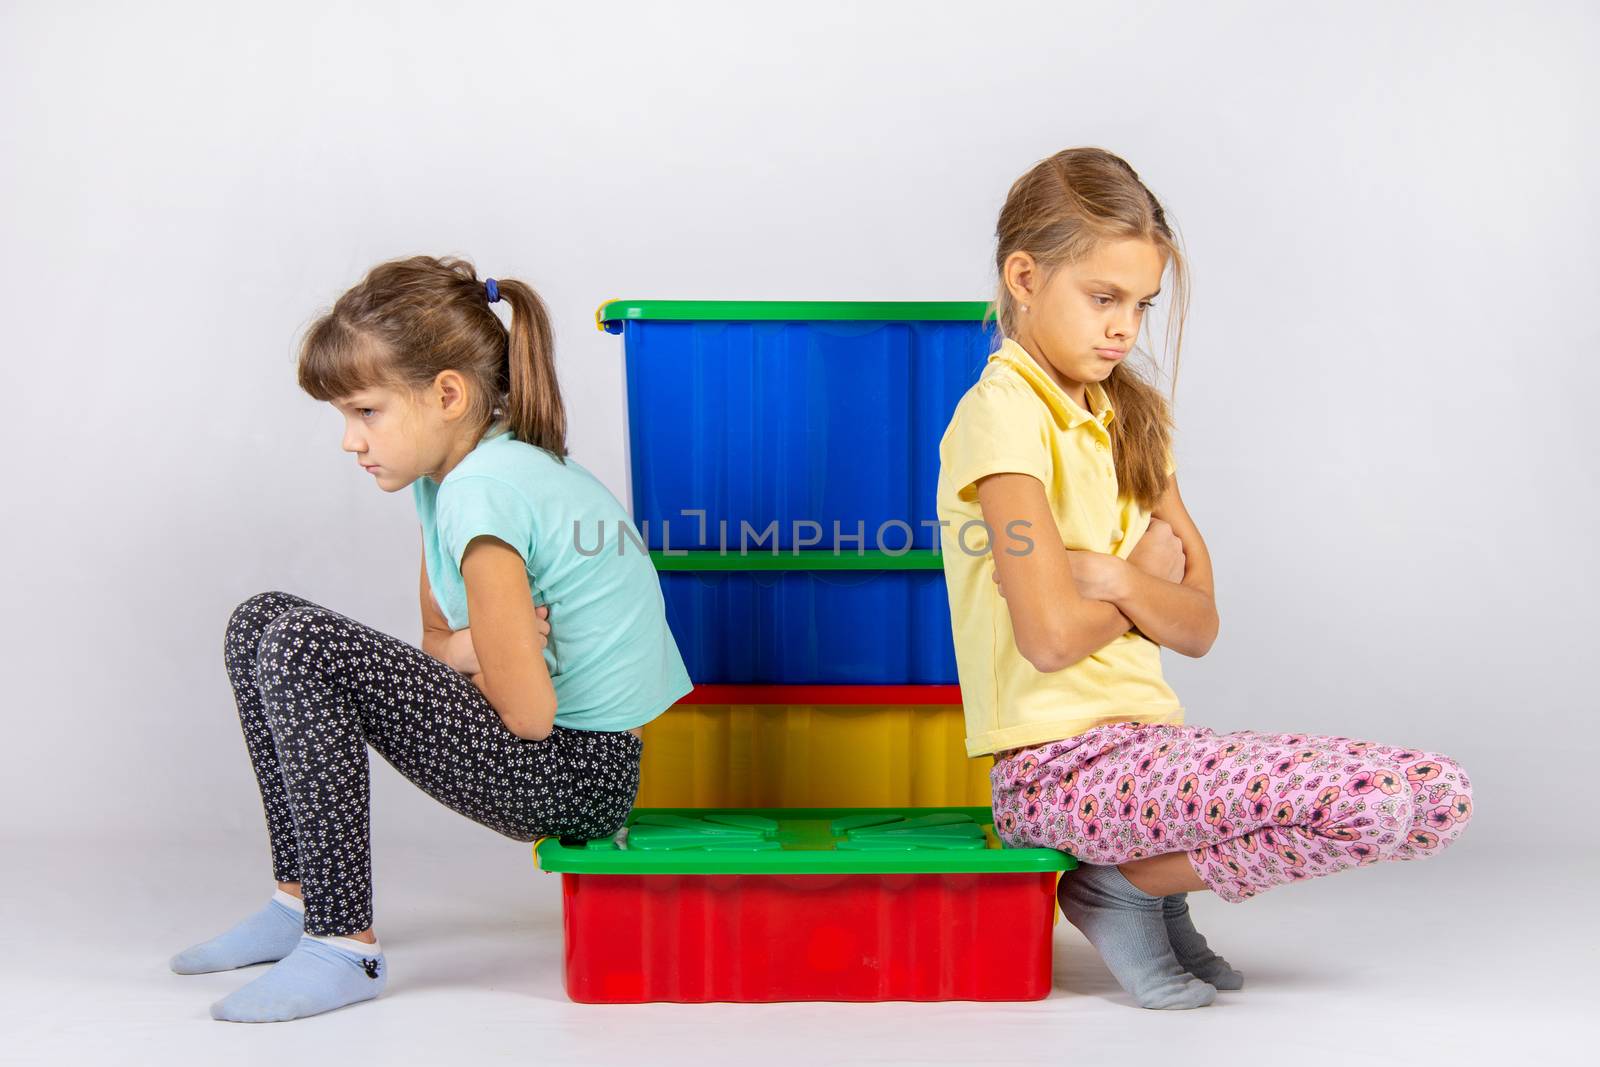 Two girls quarreled, sit on a box and turned away from each other